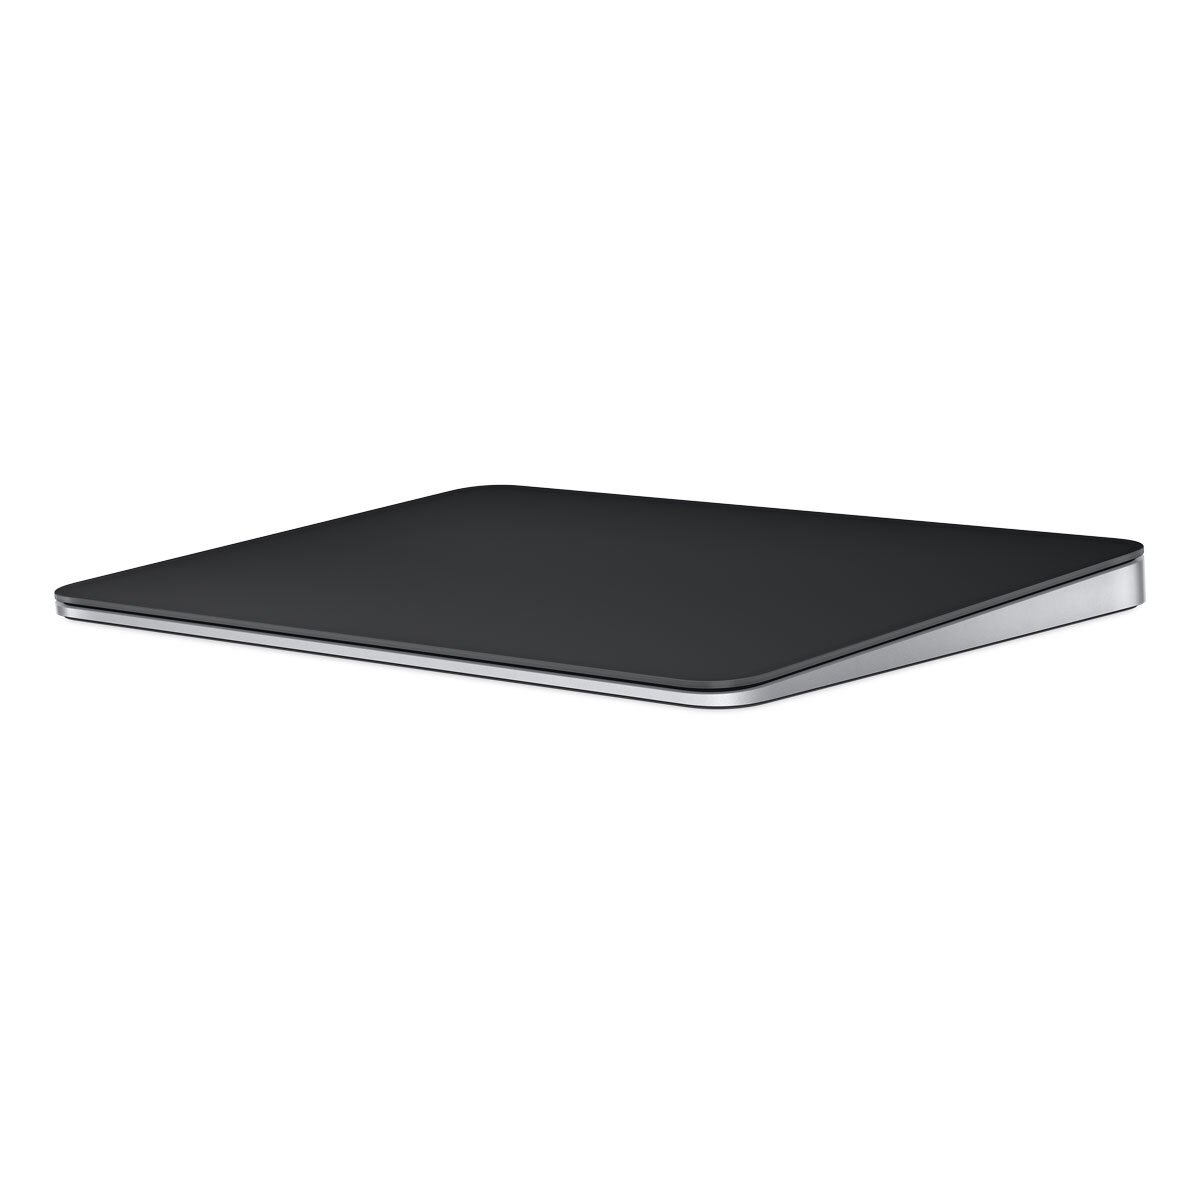 Buy Apple Magic Trackpad - Black Multi-Touch Surface, MMMP3Z/A at costco.co.uk